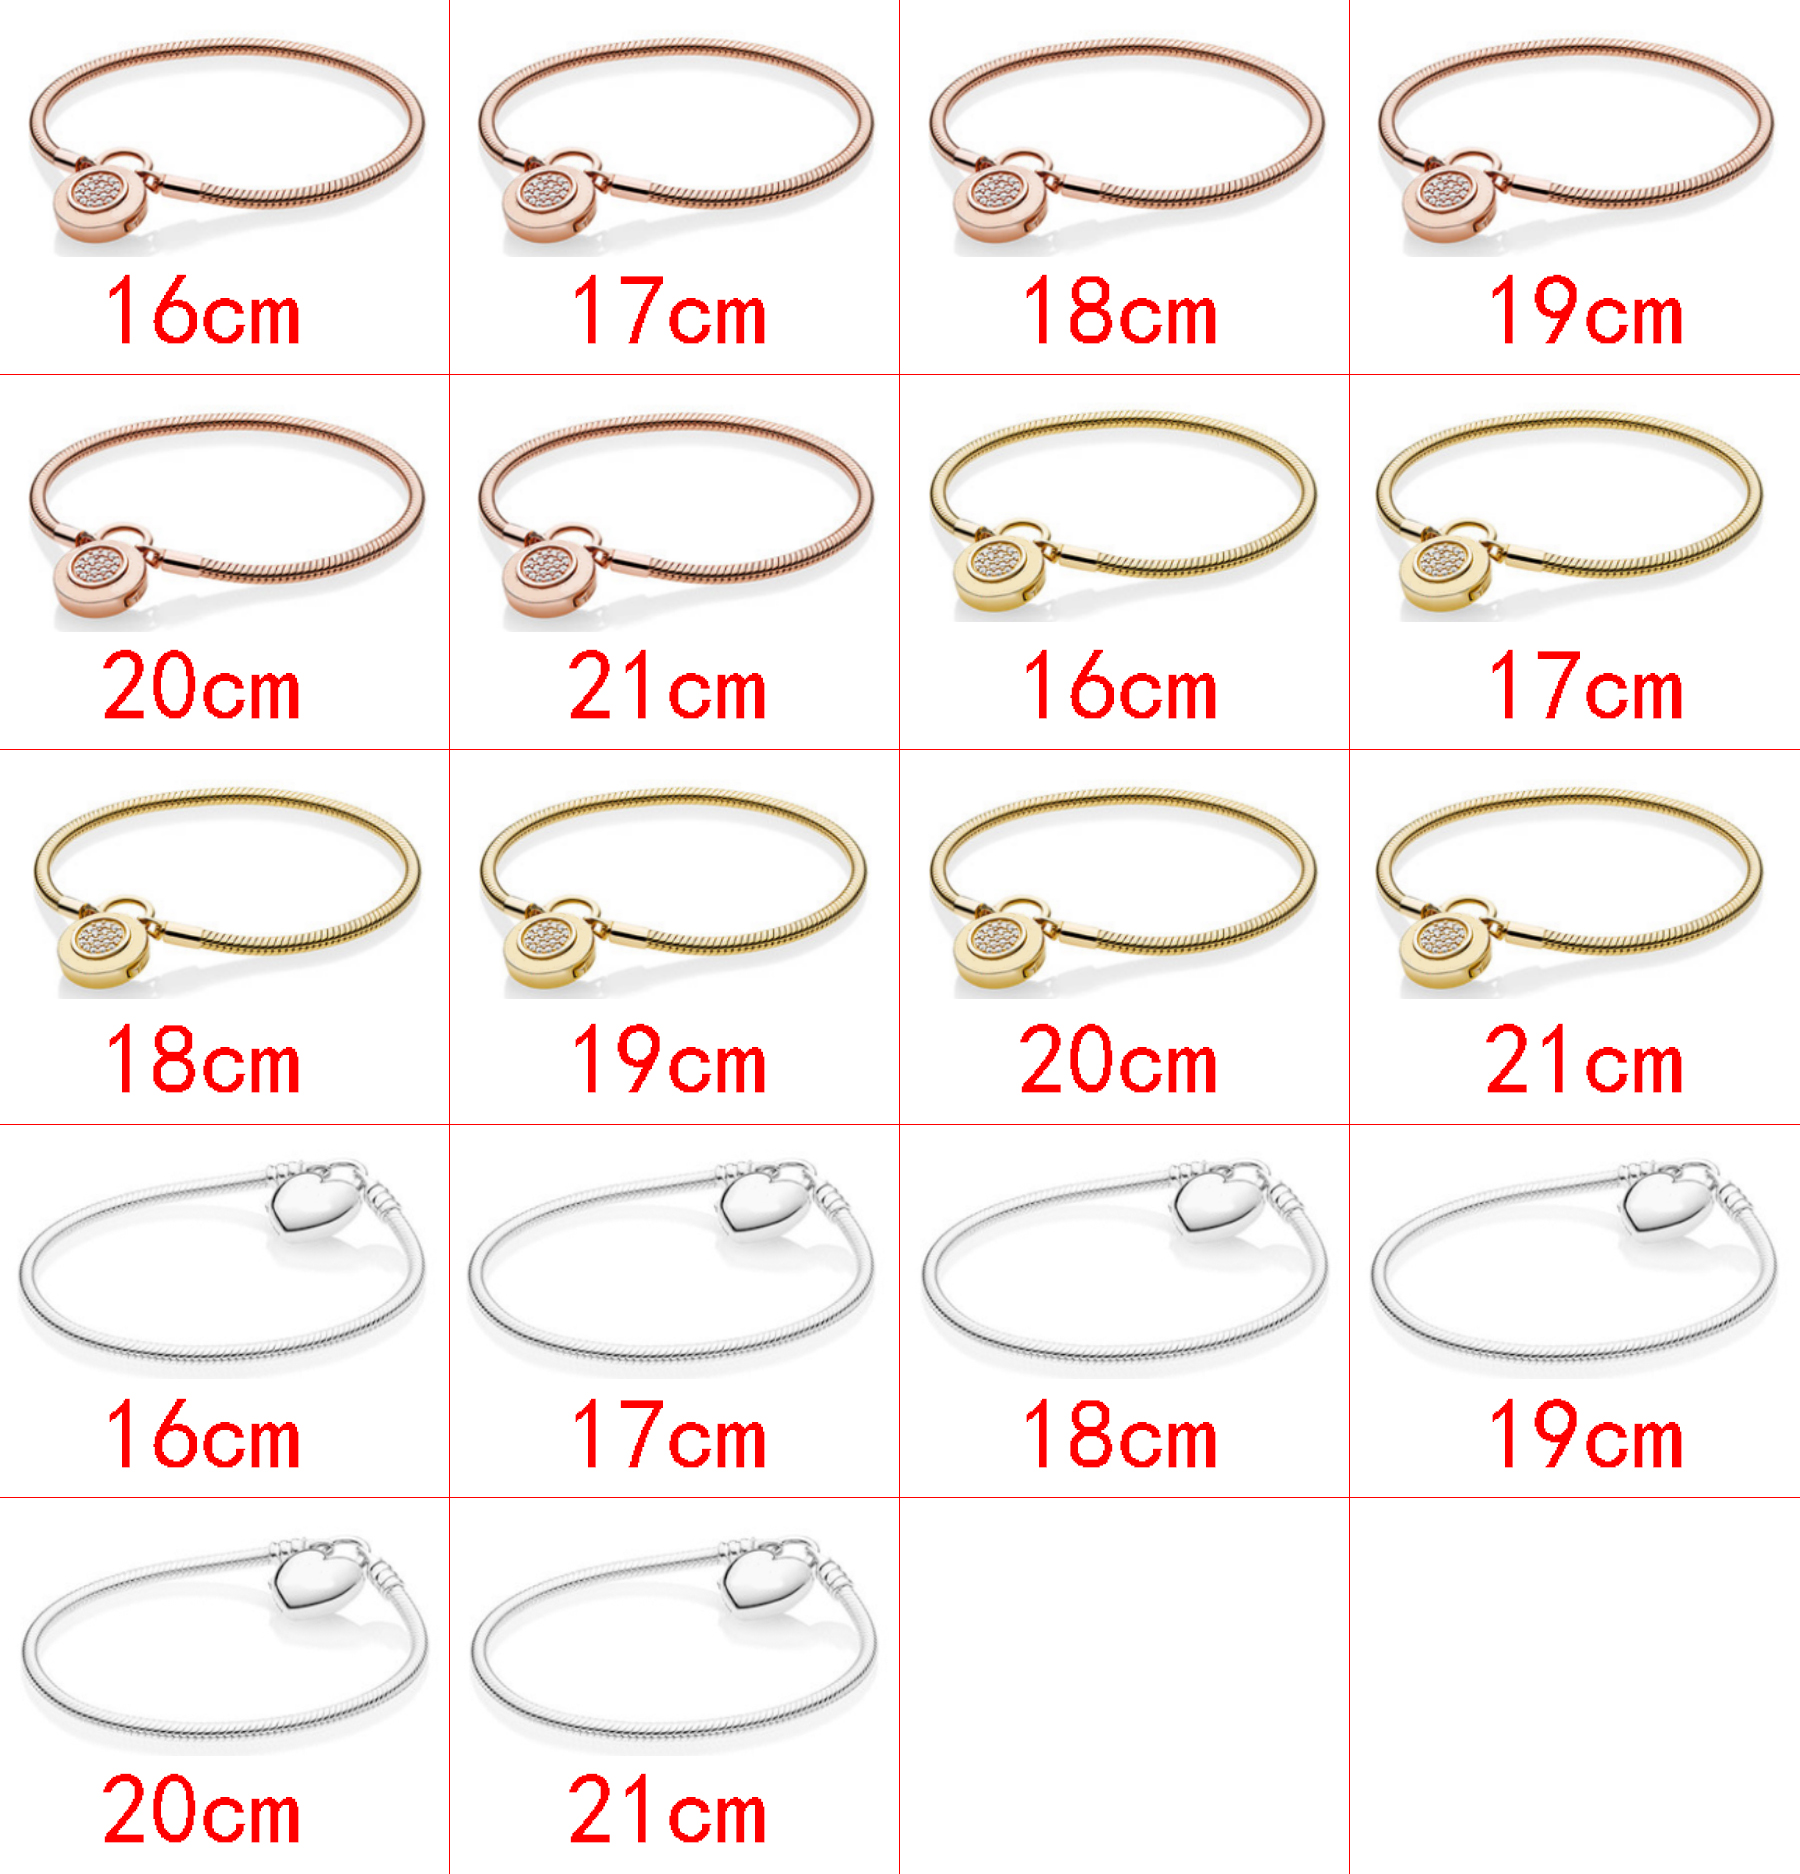 

2021 new style 925 sterling silver fashion classic trend wild DIY cartoon noble creative basic chain bracelet jewelry factory direct sales